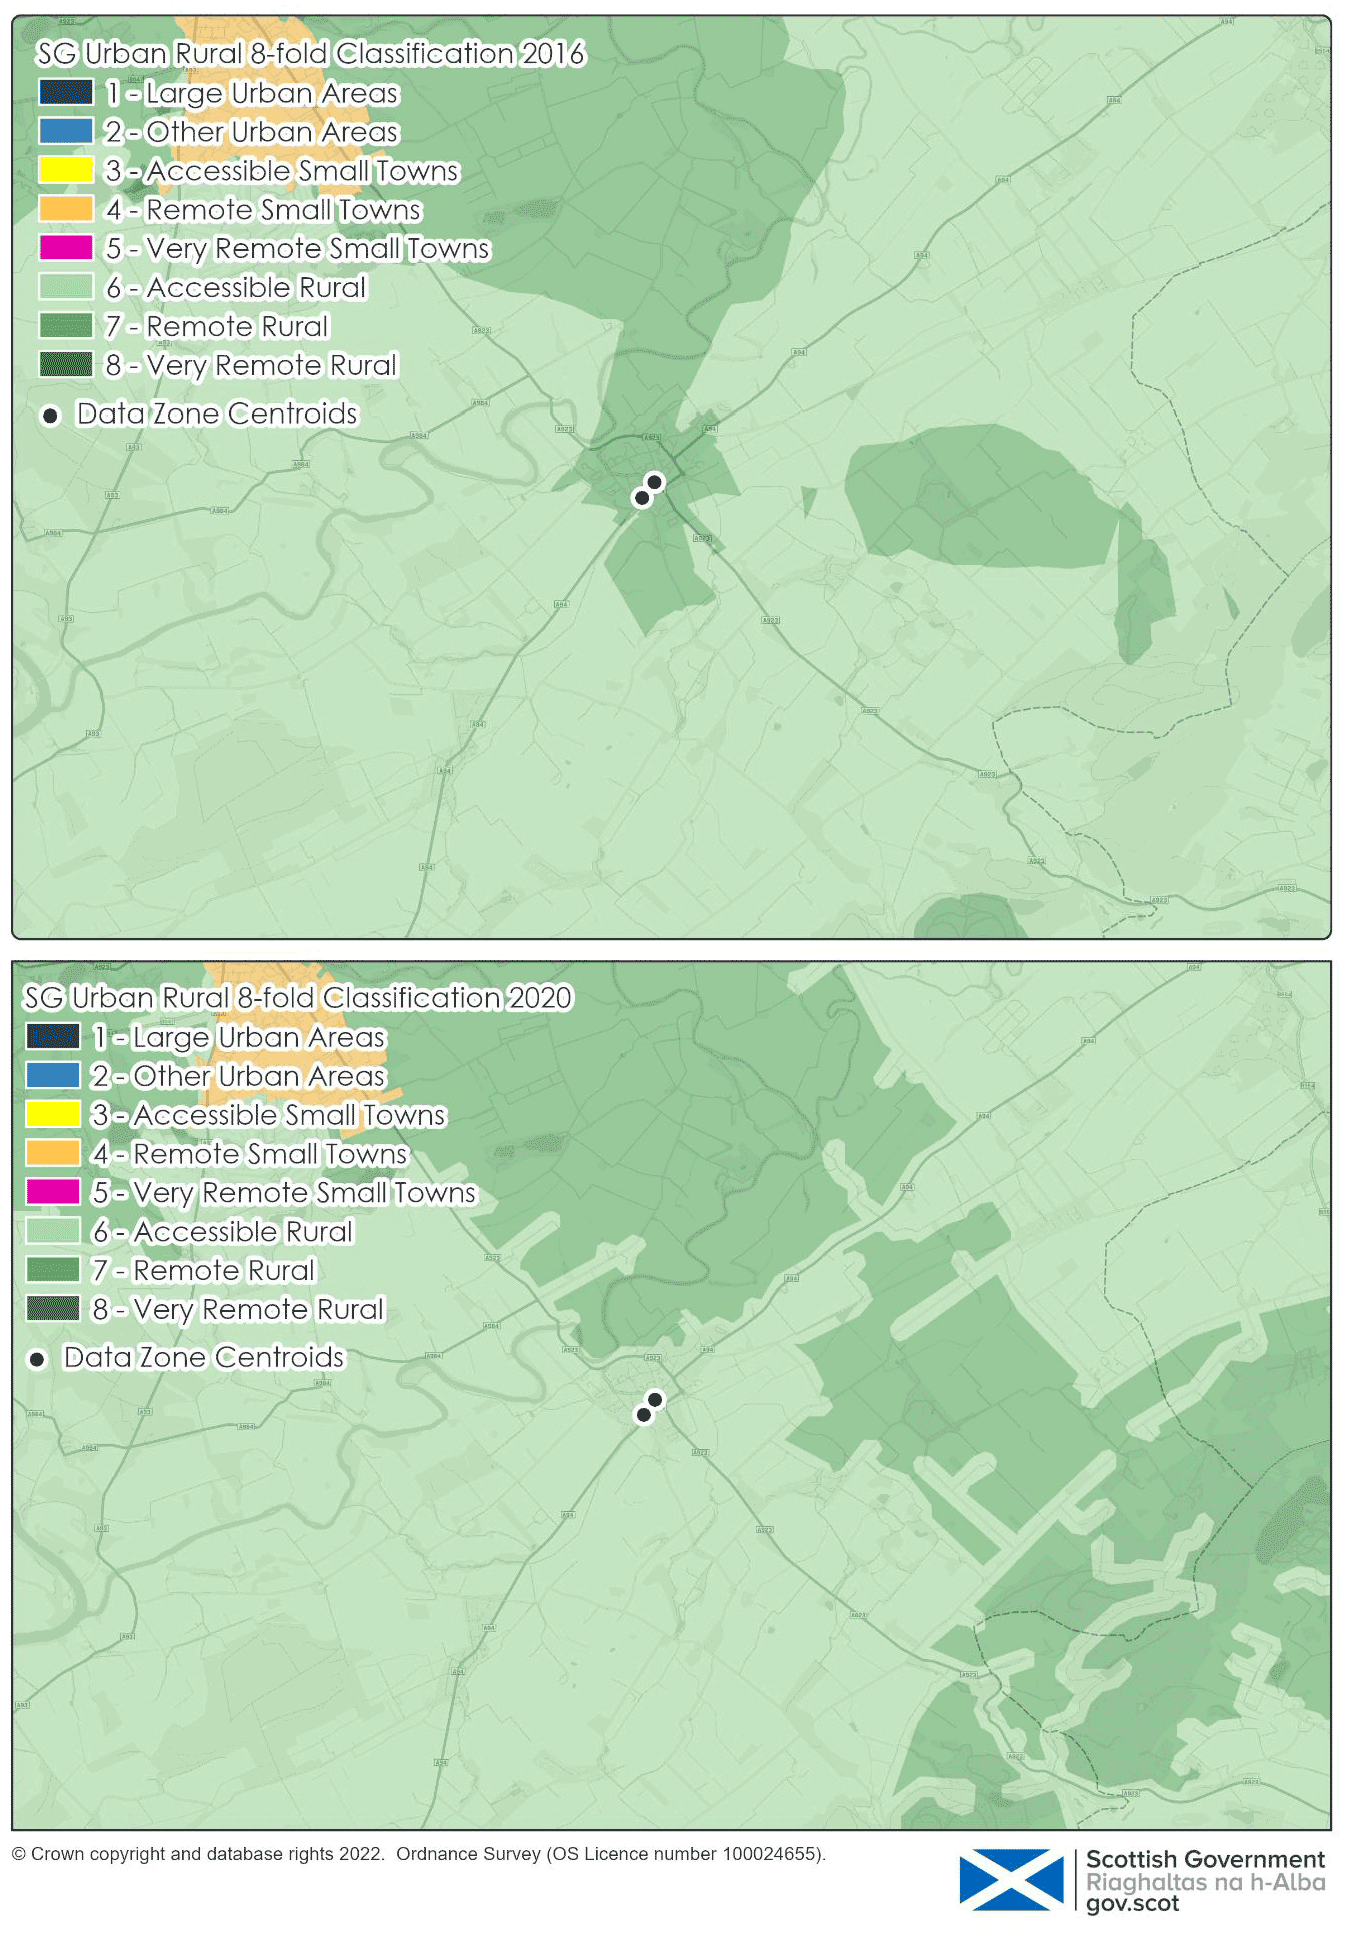 The image shows a comparison of Coupar Angus town and the surrounding area in the SG Urban Rural Classification 2016 and the SG Urban Rural Classification 2020.  In 2016, Coupar Angus town is classed as Remote Rural and in 2020 it is classed as Accessible Rural.